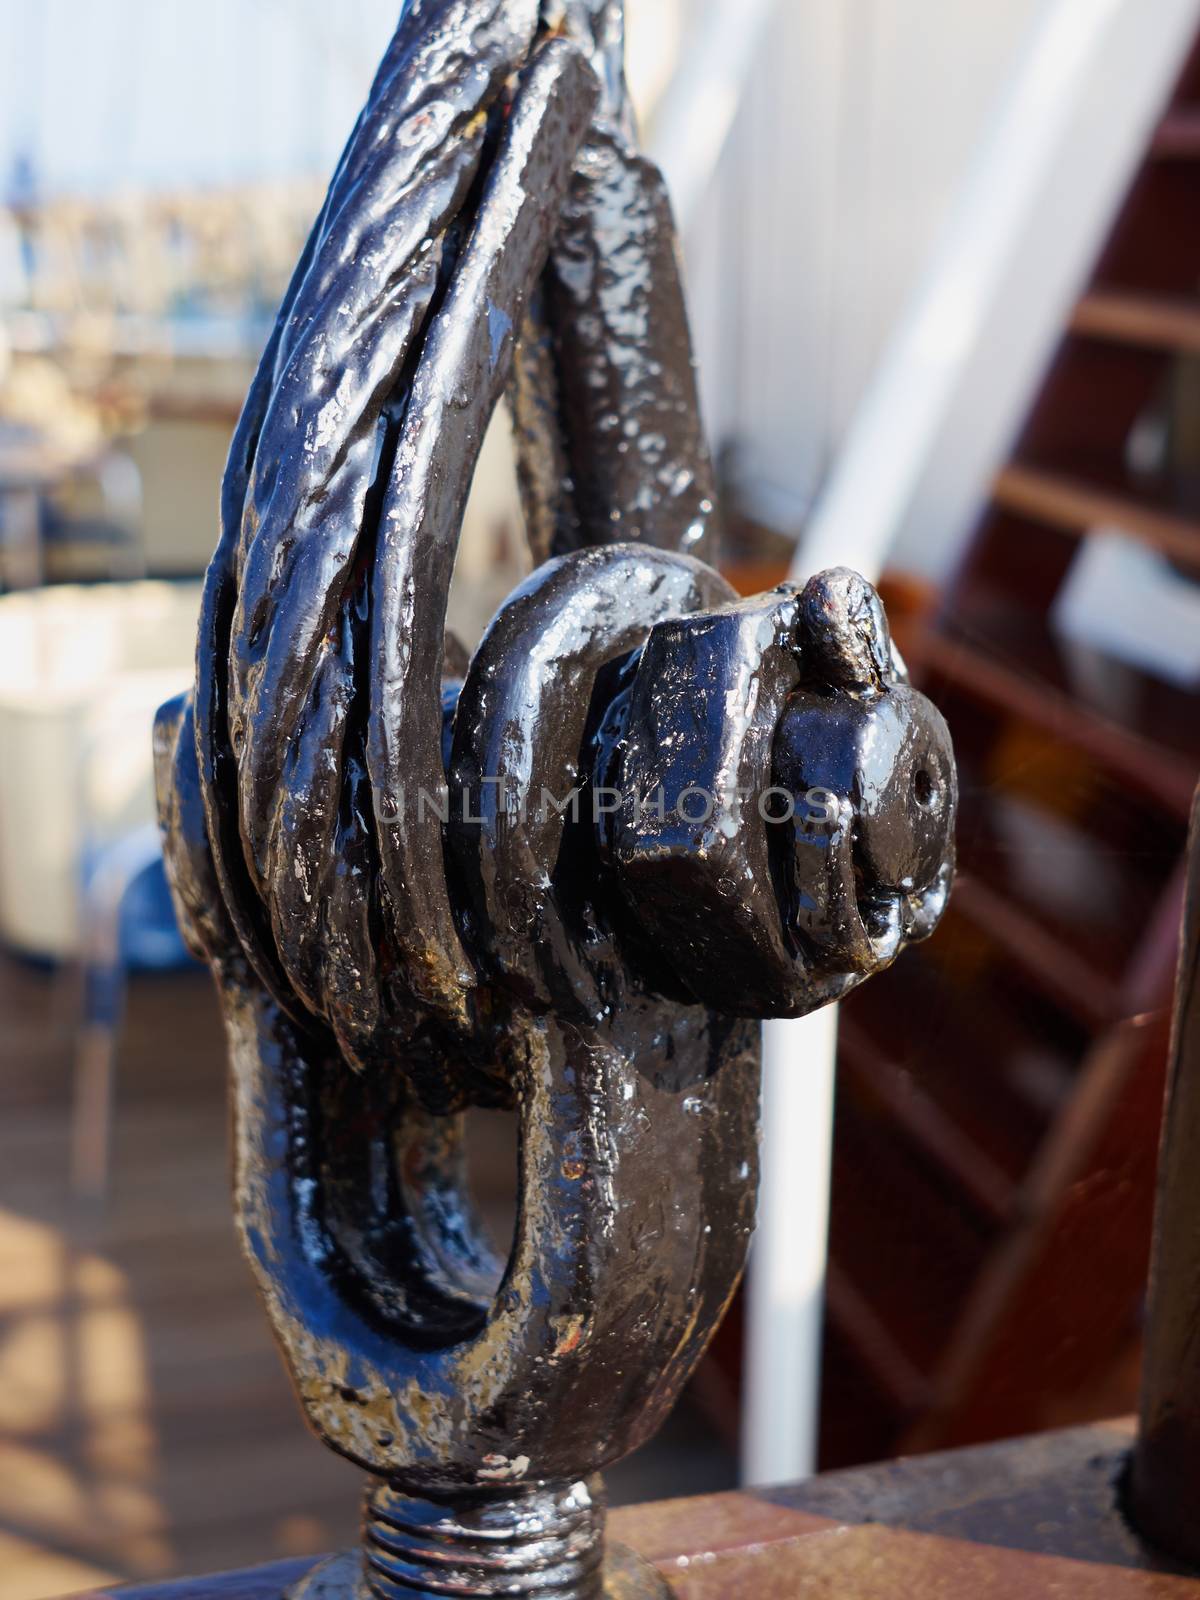 Heavy duty strong steel wire cable rope sling with safety anchor shackle used in a big sail boat